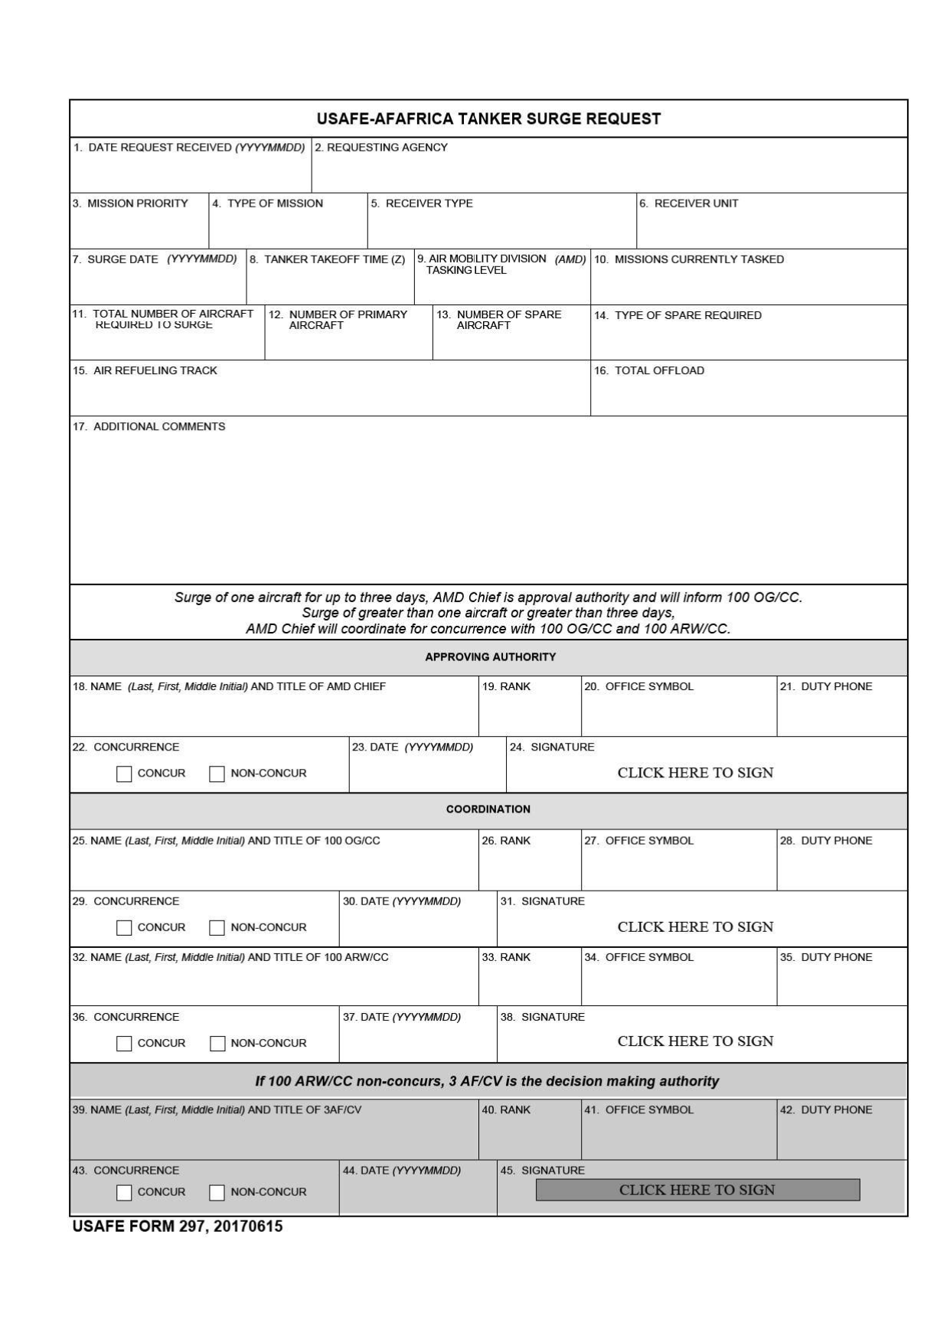 USAFE Form 297 Usafe-Afafrica Tanker Surge Request, Page 1